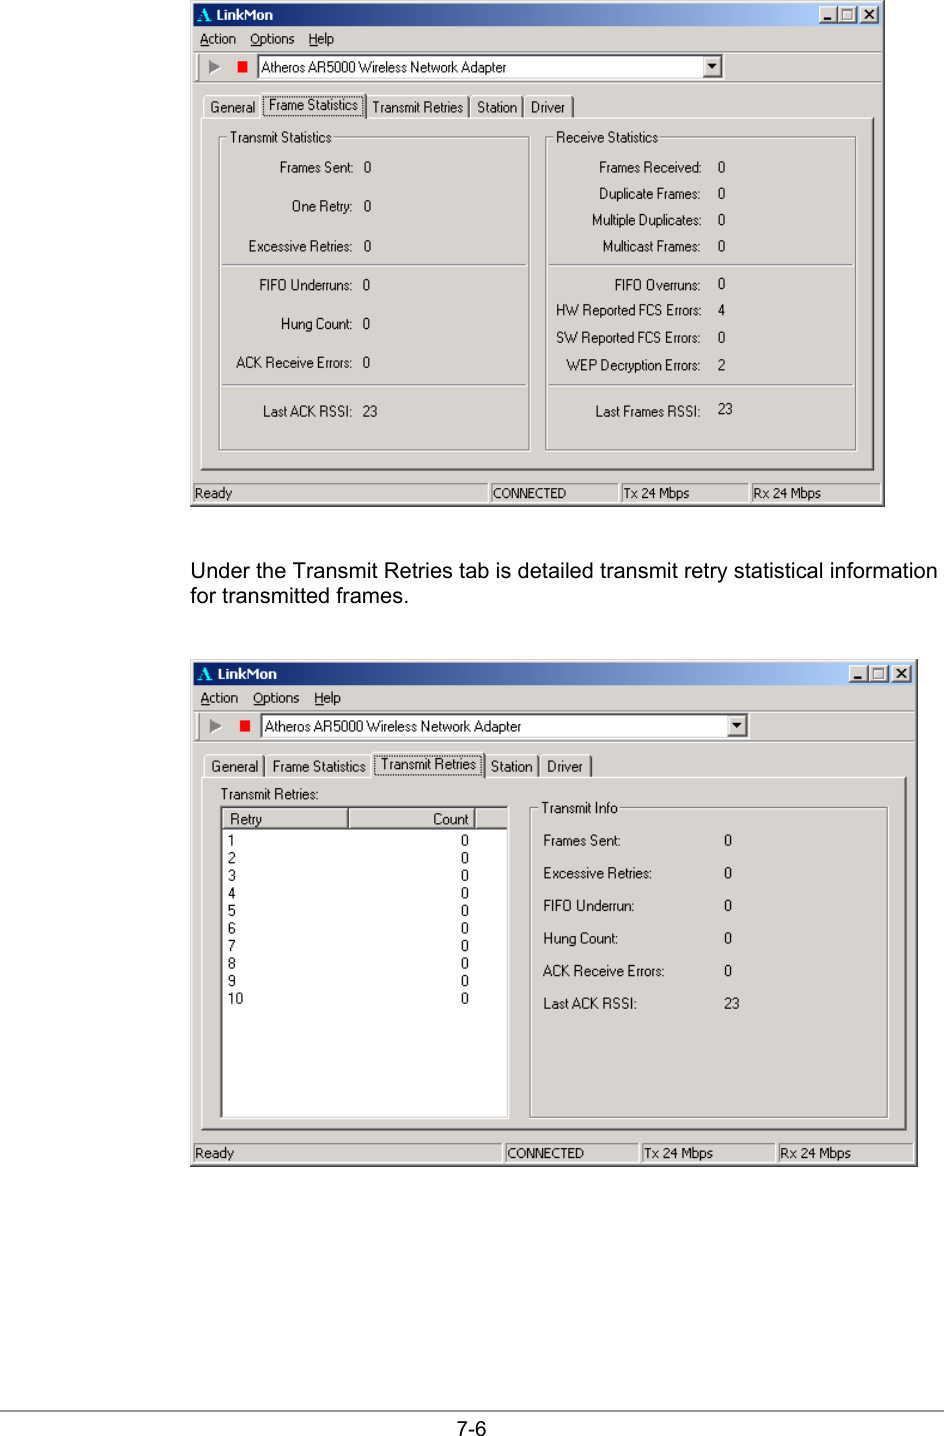  7-6   Under the Transmit Retries tab is detailed transmit retry statistical information for transmitted frames.   